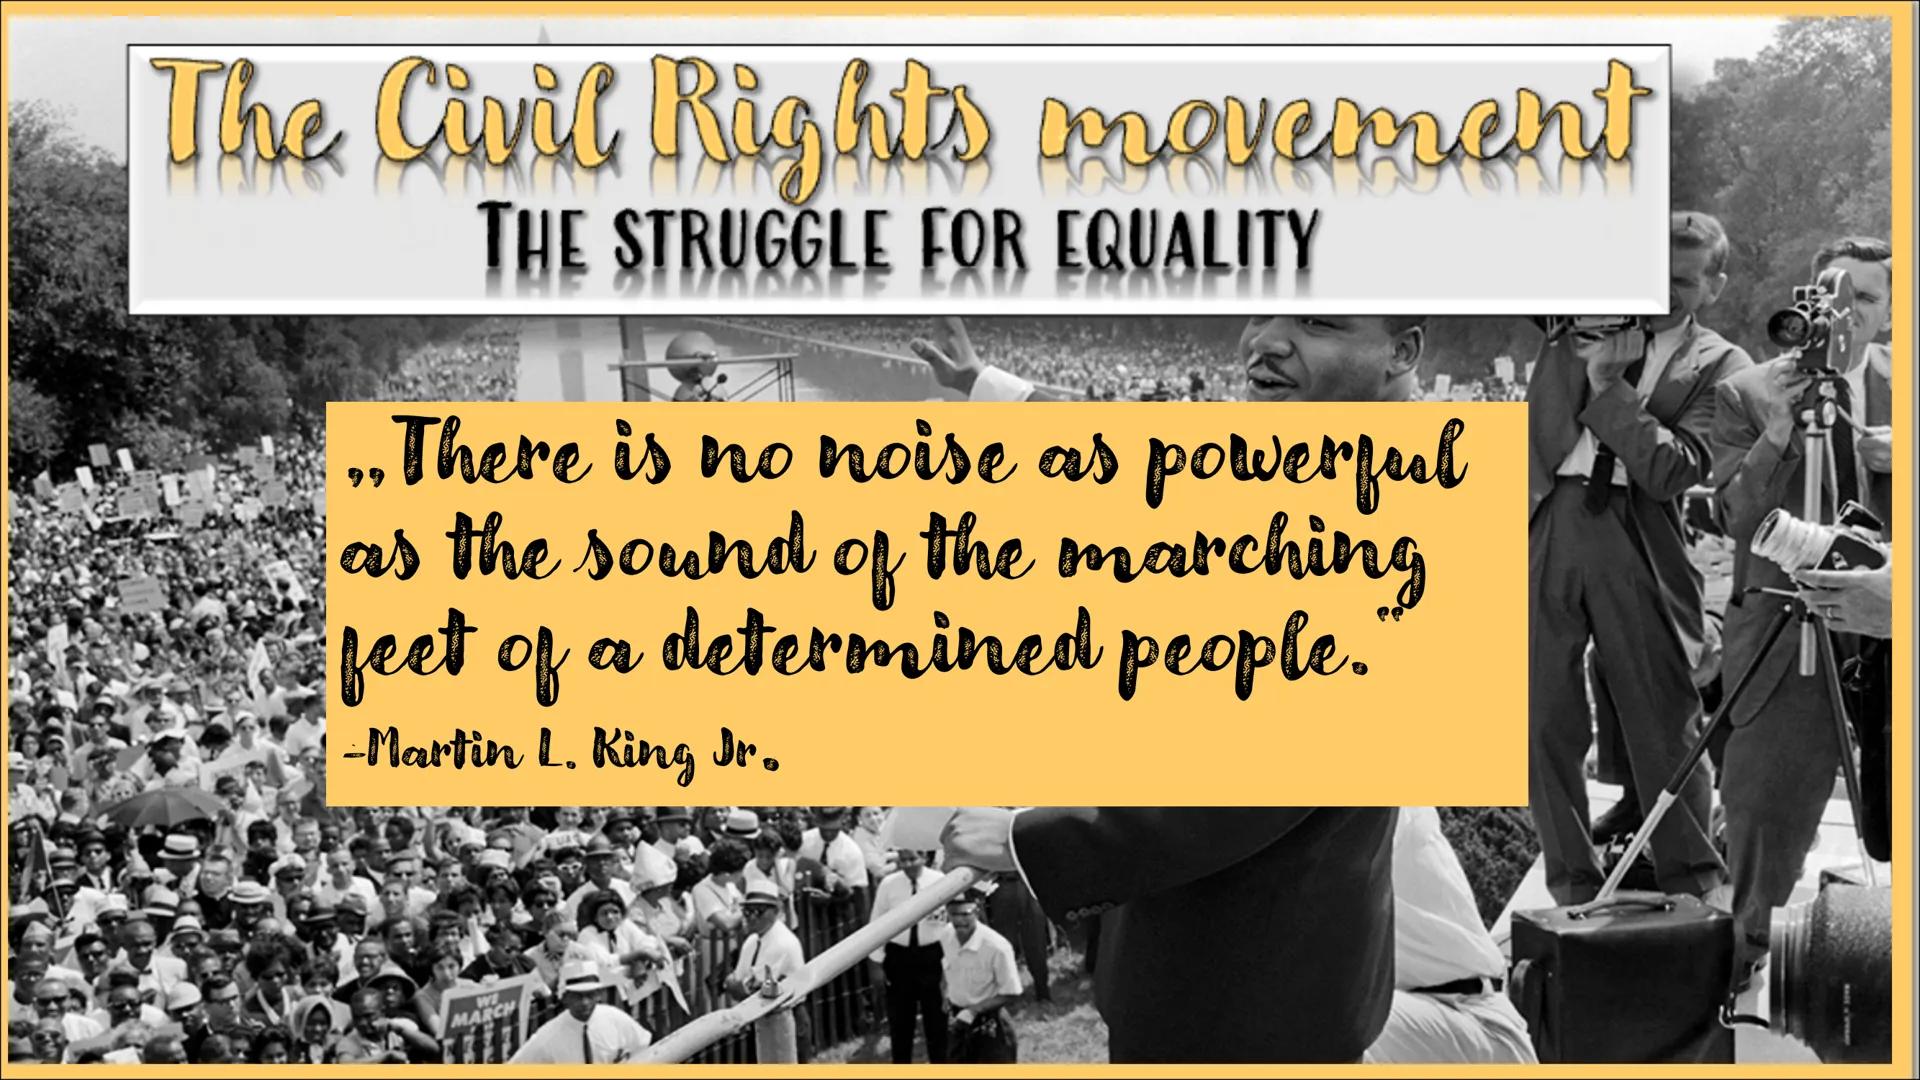 civil rights movement
The struggle for equality
Life before the movement
▶ Abolishment of slavery after the Civil War
▸ Discrimination and r